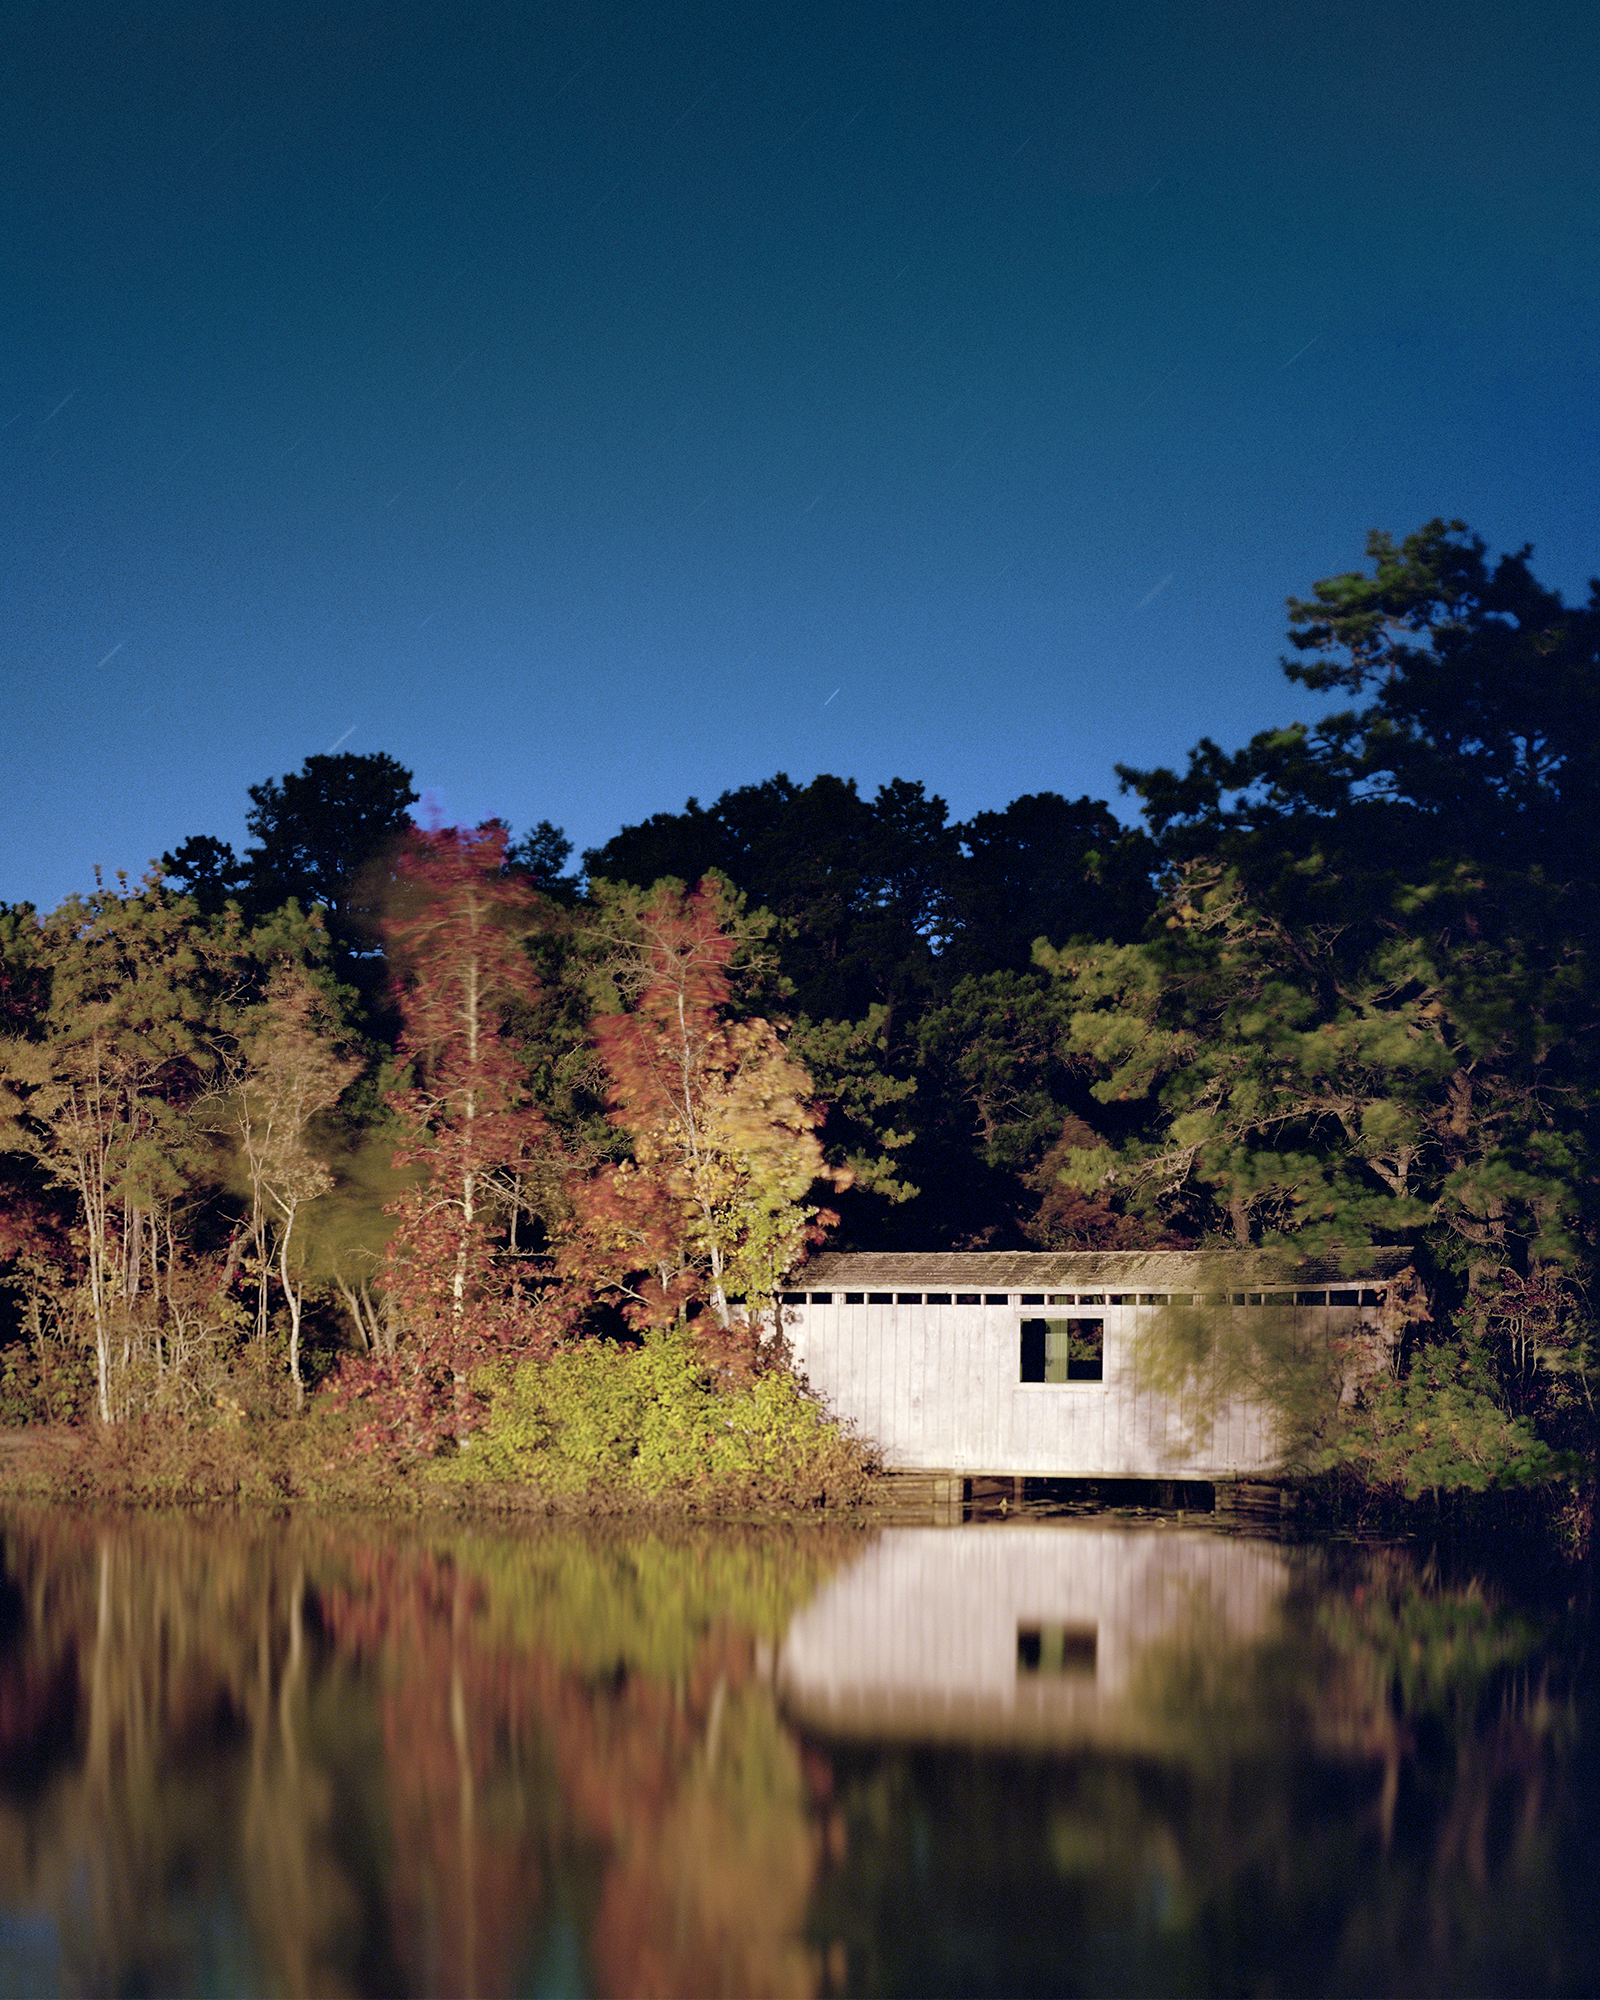 lakehouse at dusk, large spotlight shining on house, forest in background, lake and house in the foreground